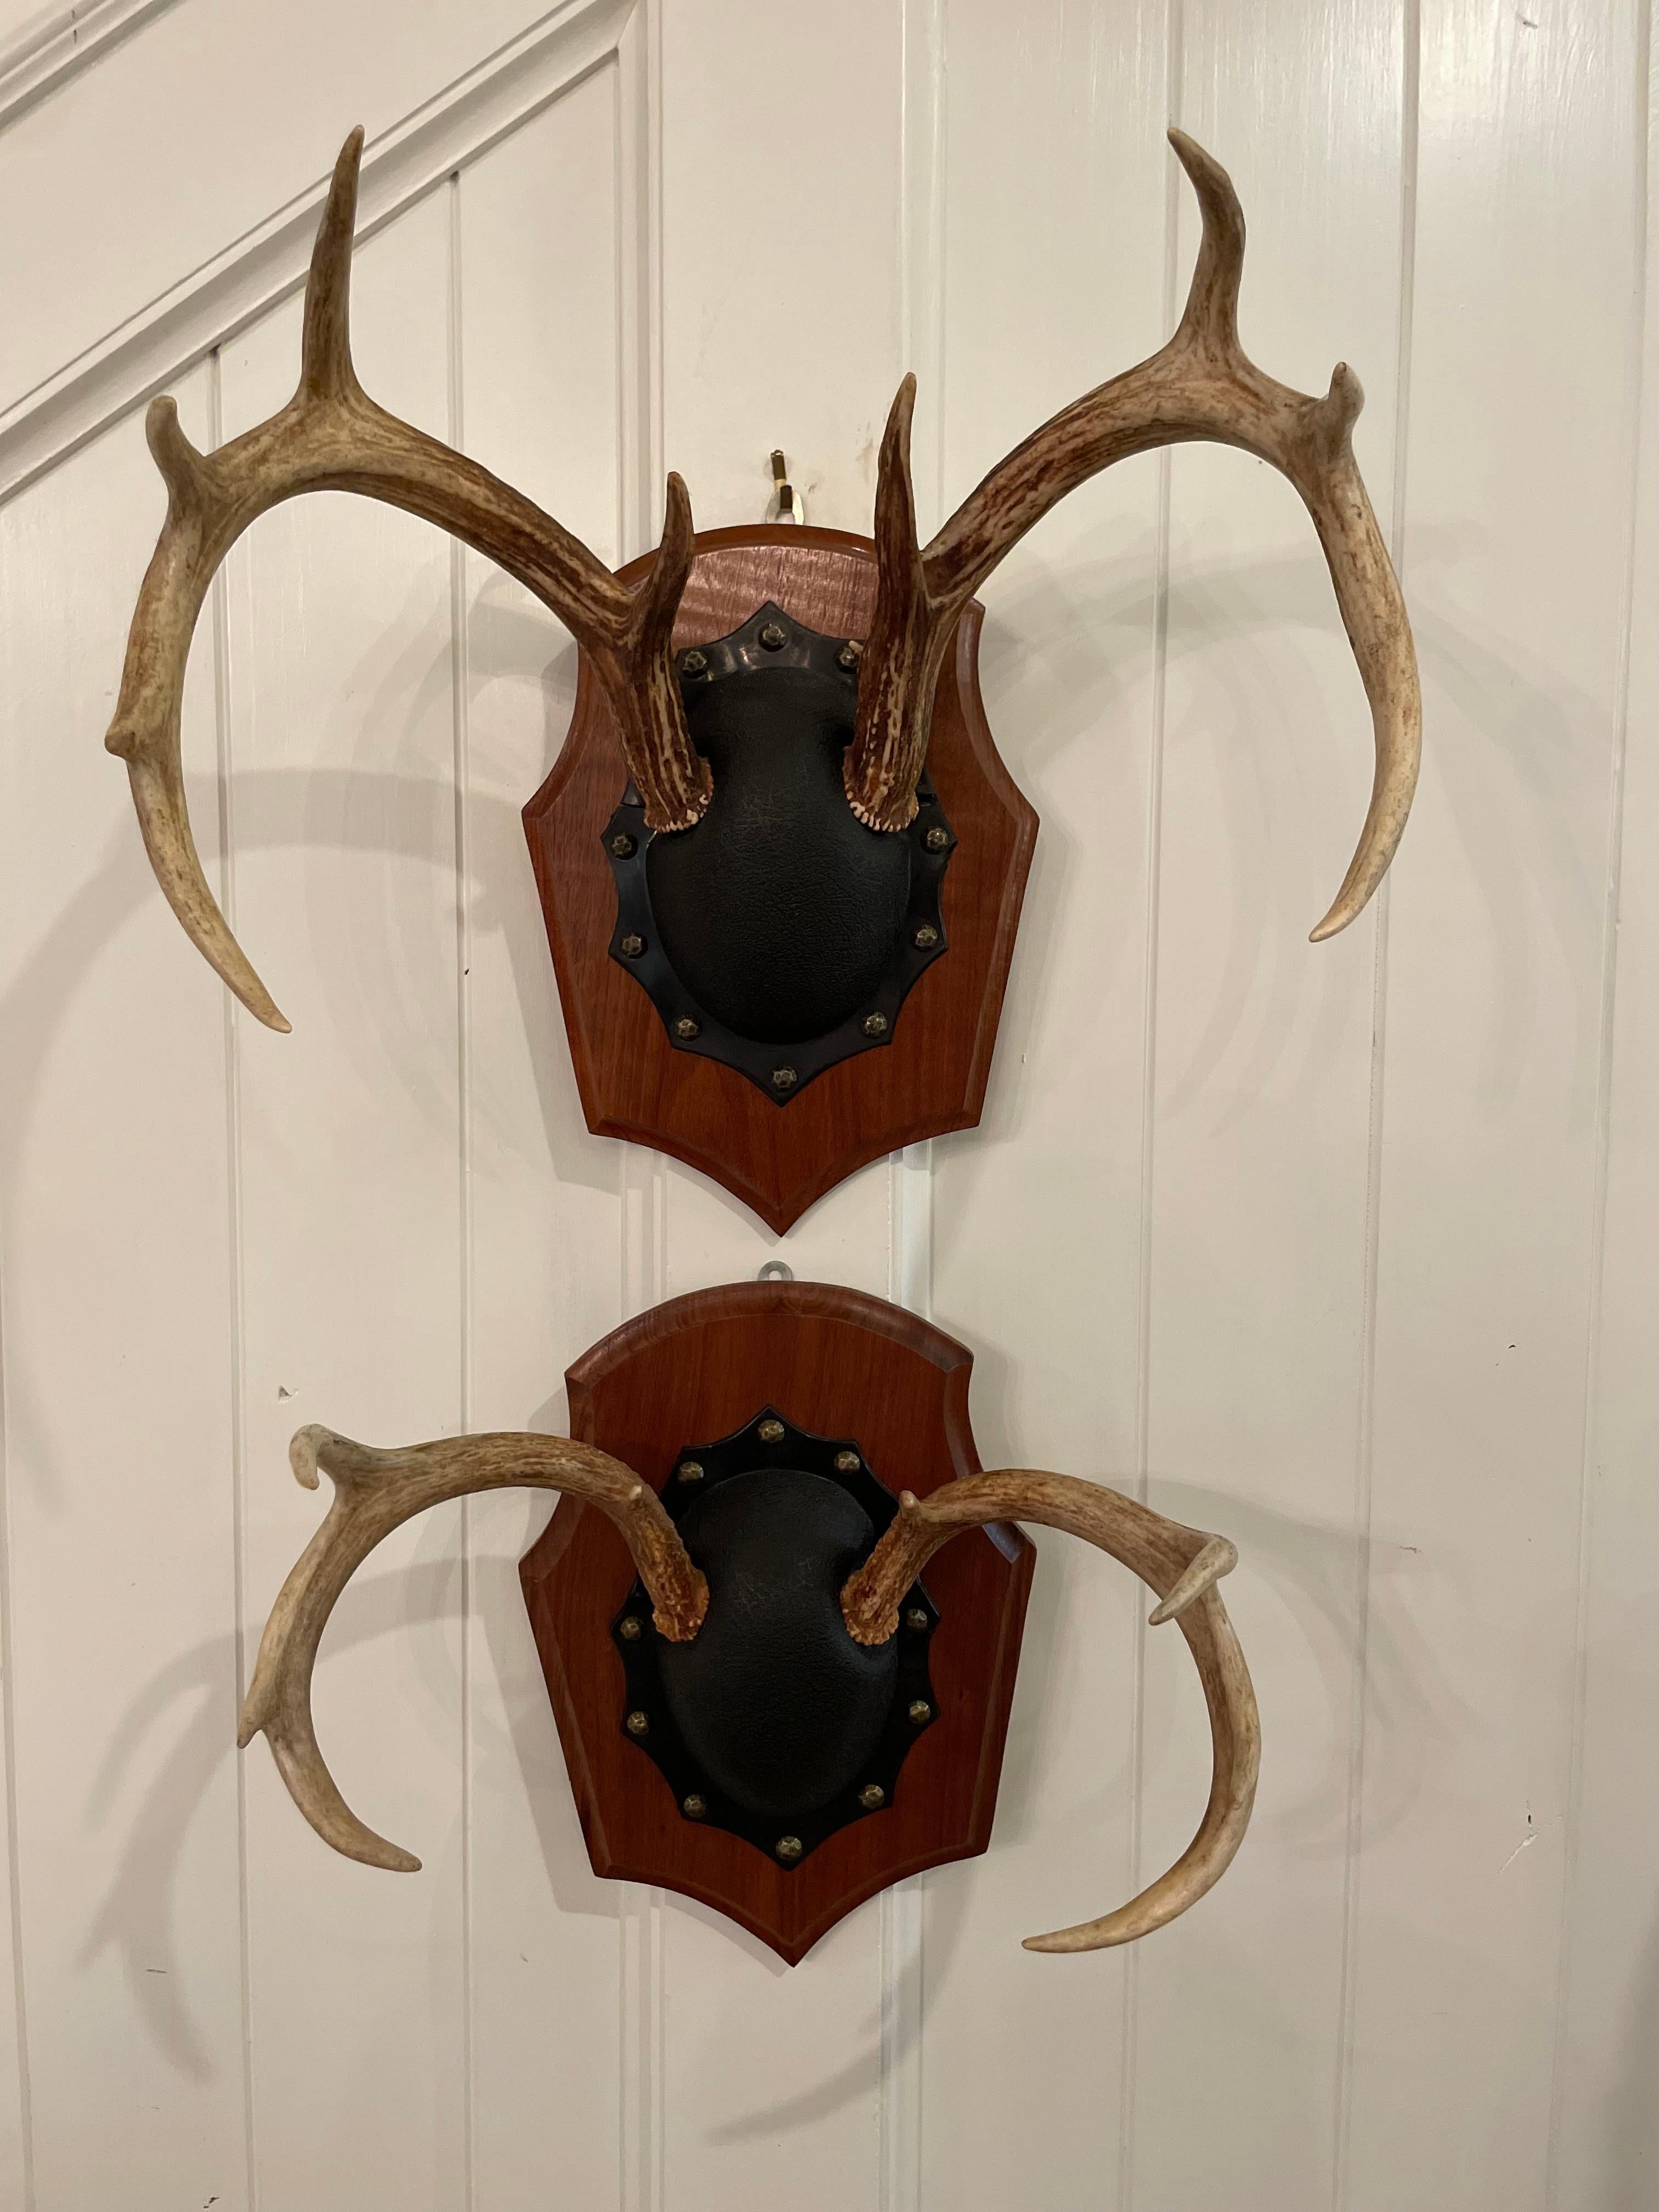 Beautiful mid century pair of deer antlers mounted on a carved wood plaque with black and brass studded center.

Fabulous set of 8 and 9 point deer antlers . One measures 14 inches across at widest point and the other measures 16 inches wide. The